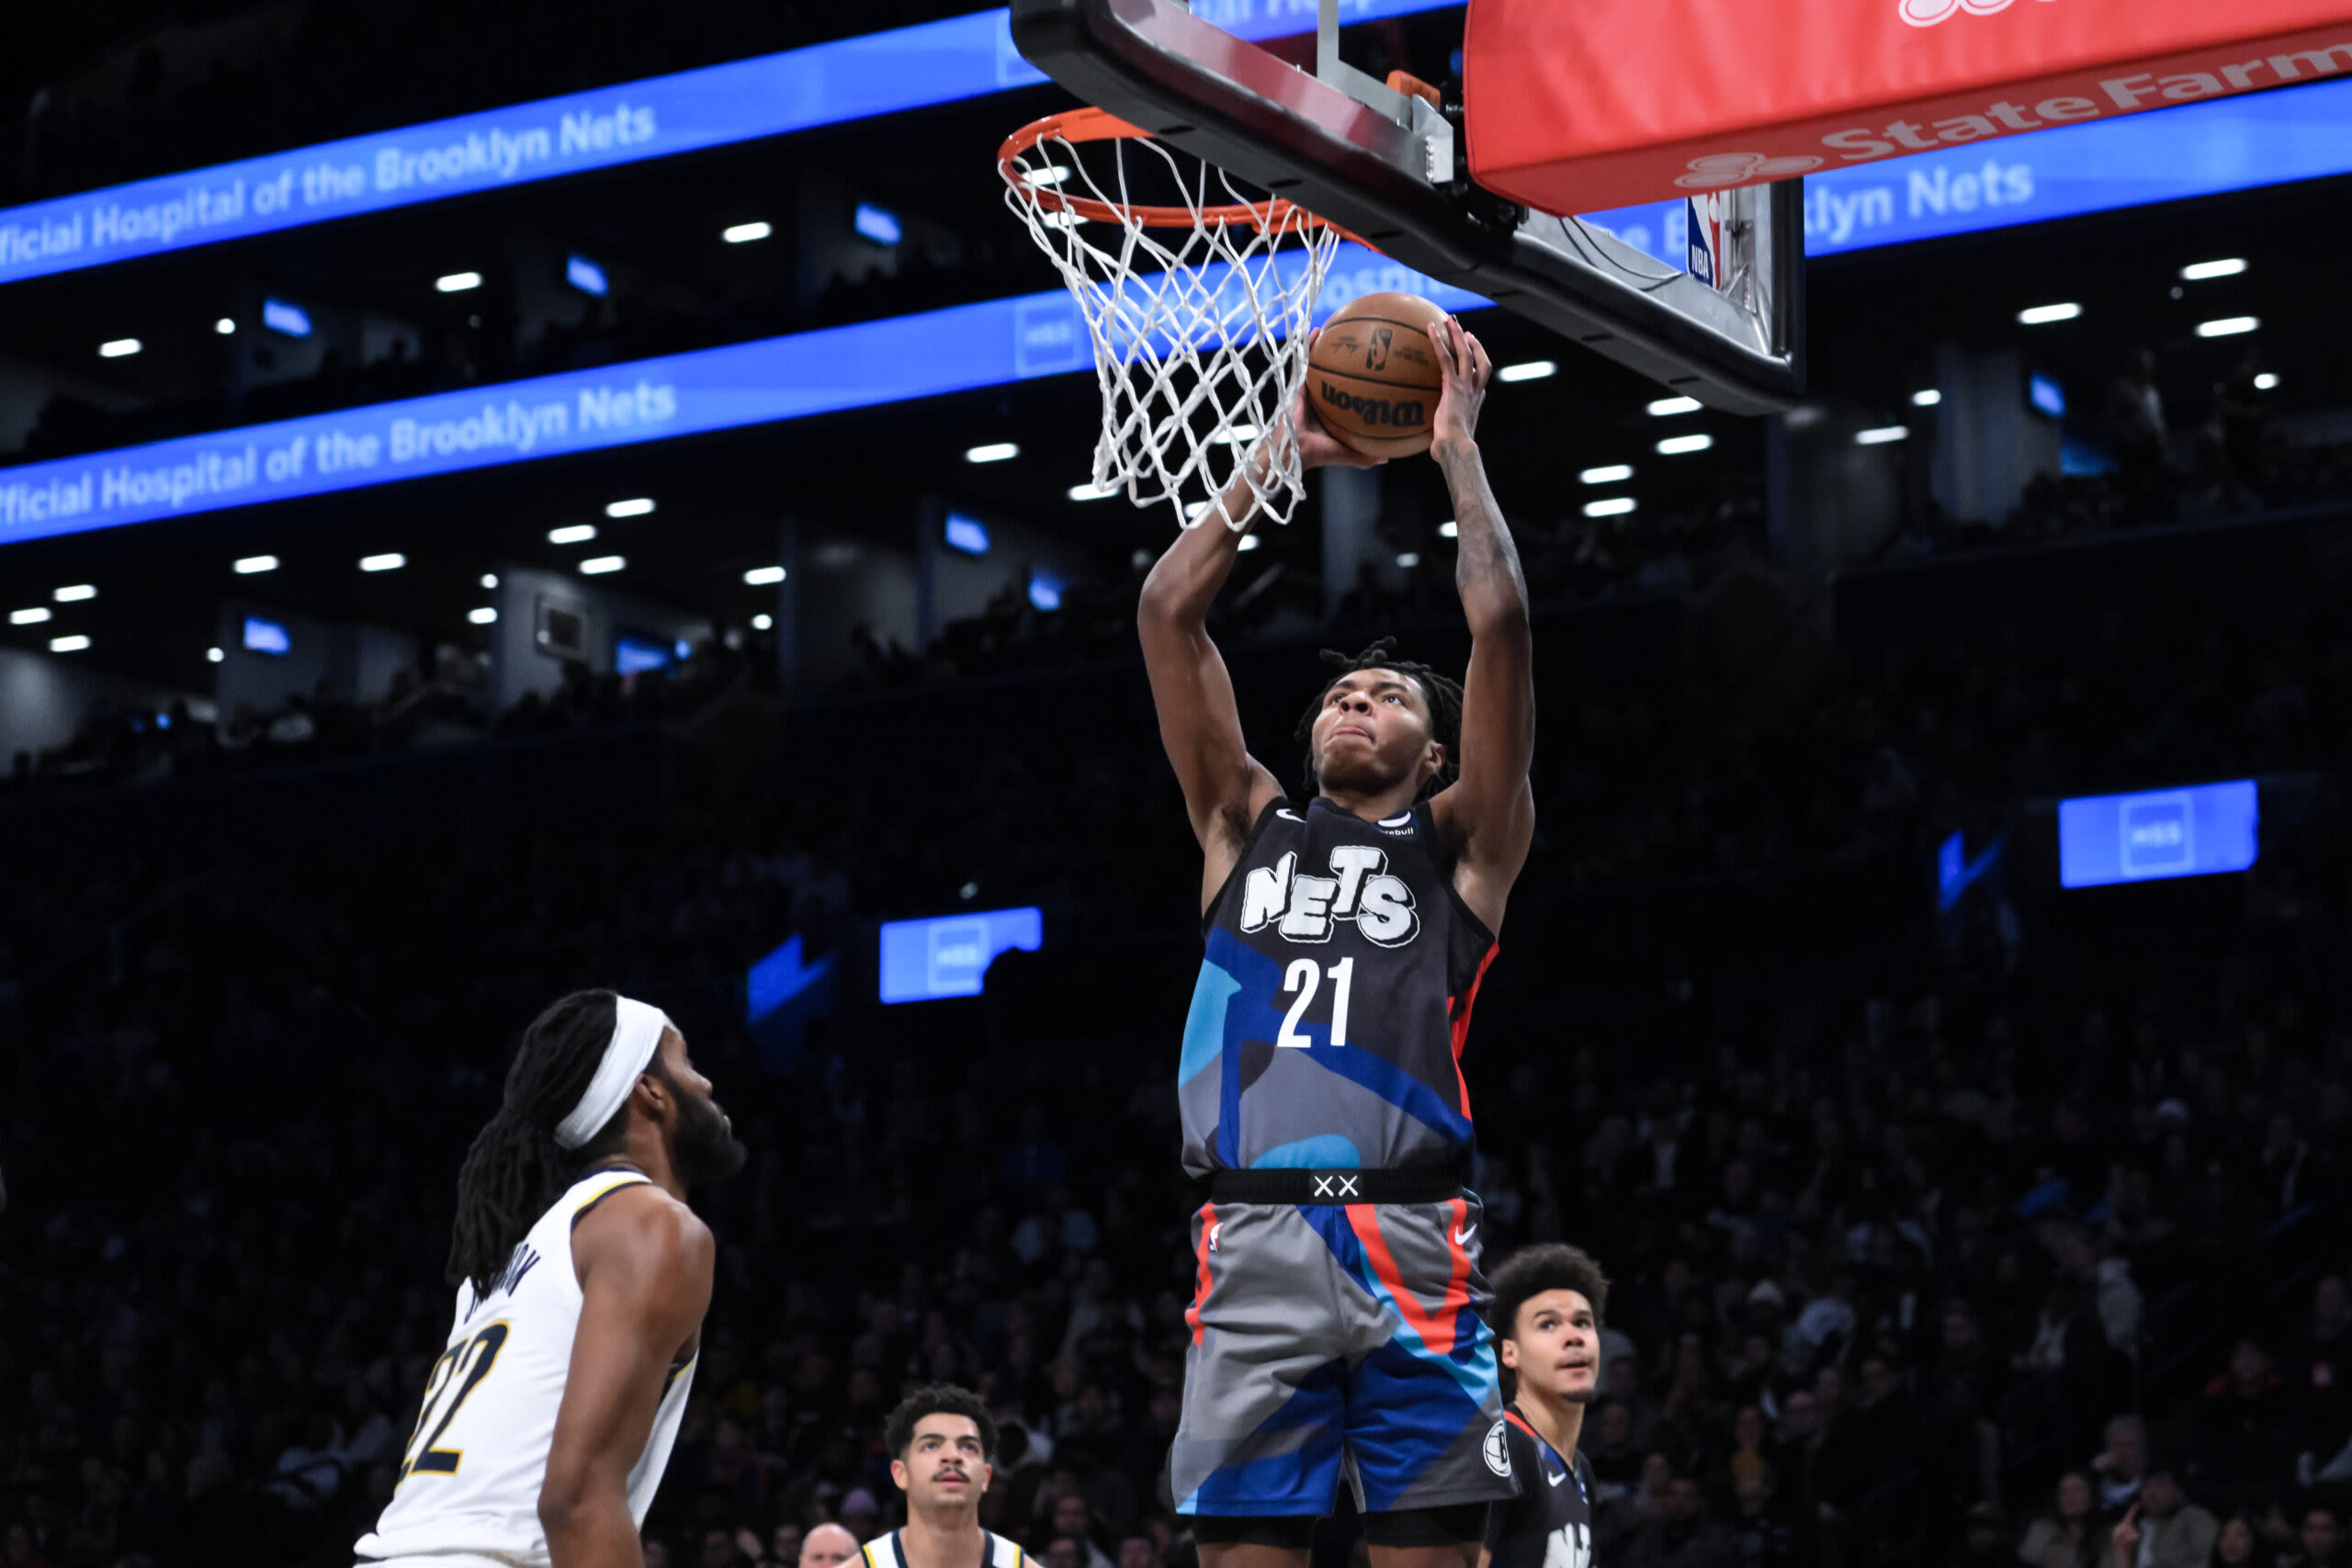 Should Nets’ Noah Clowney be untouchable from this point forward?